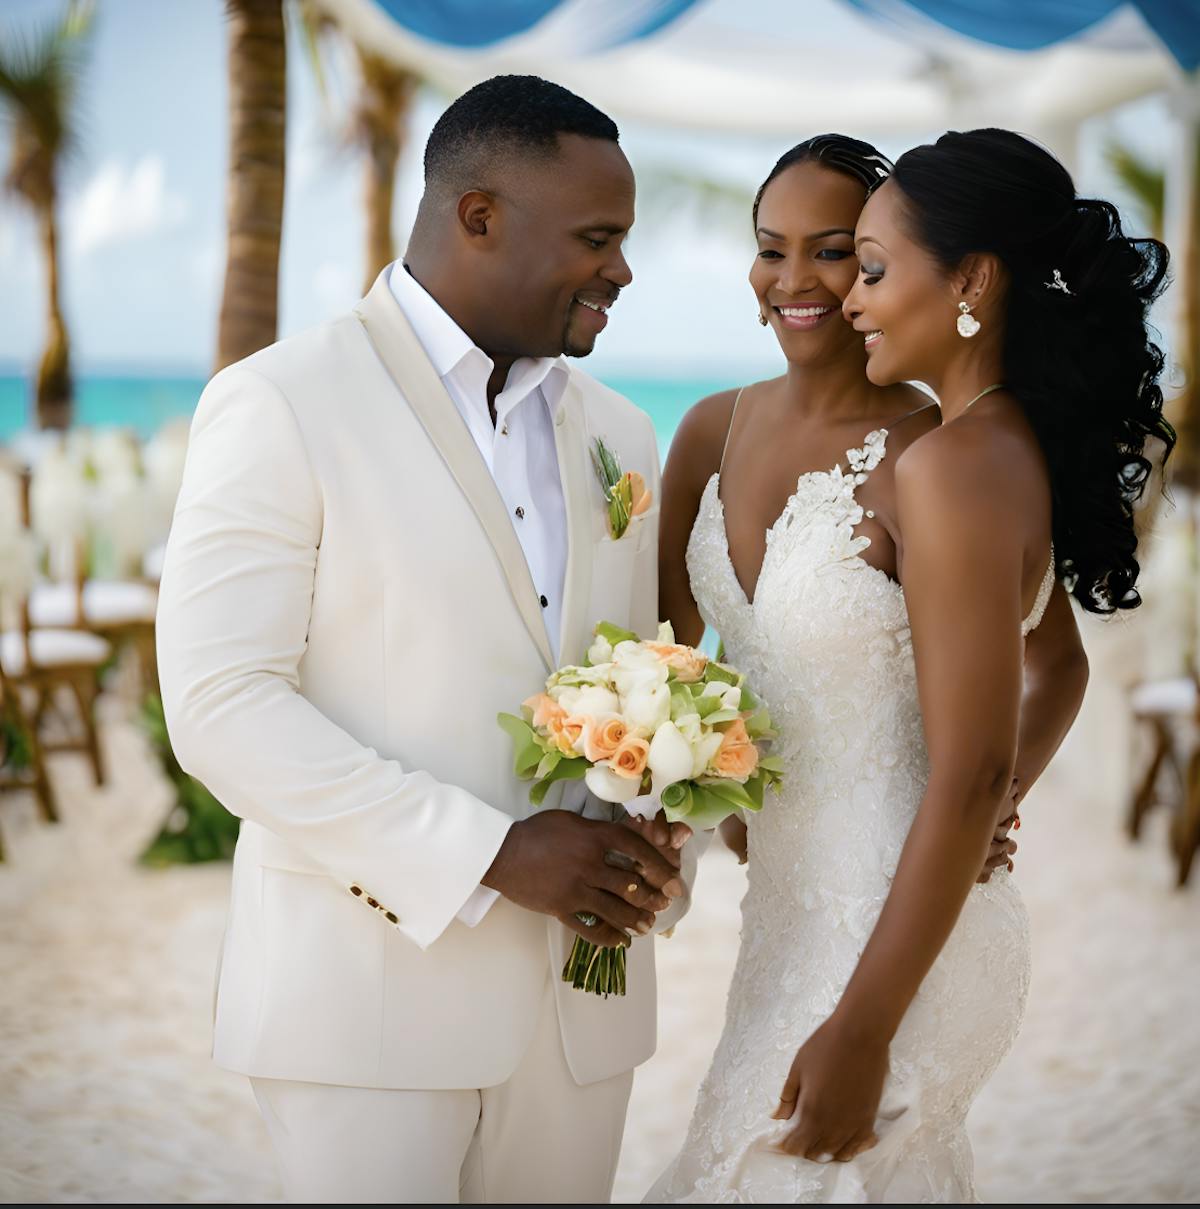 Can You Get Married in The Bahamas